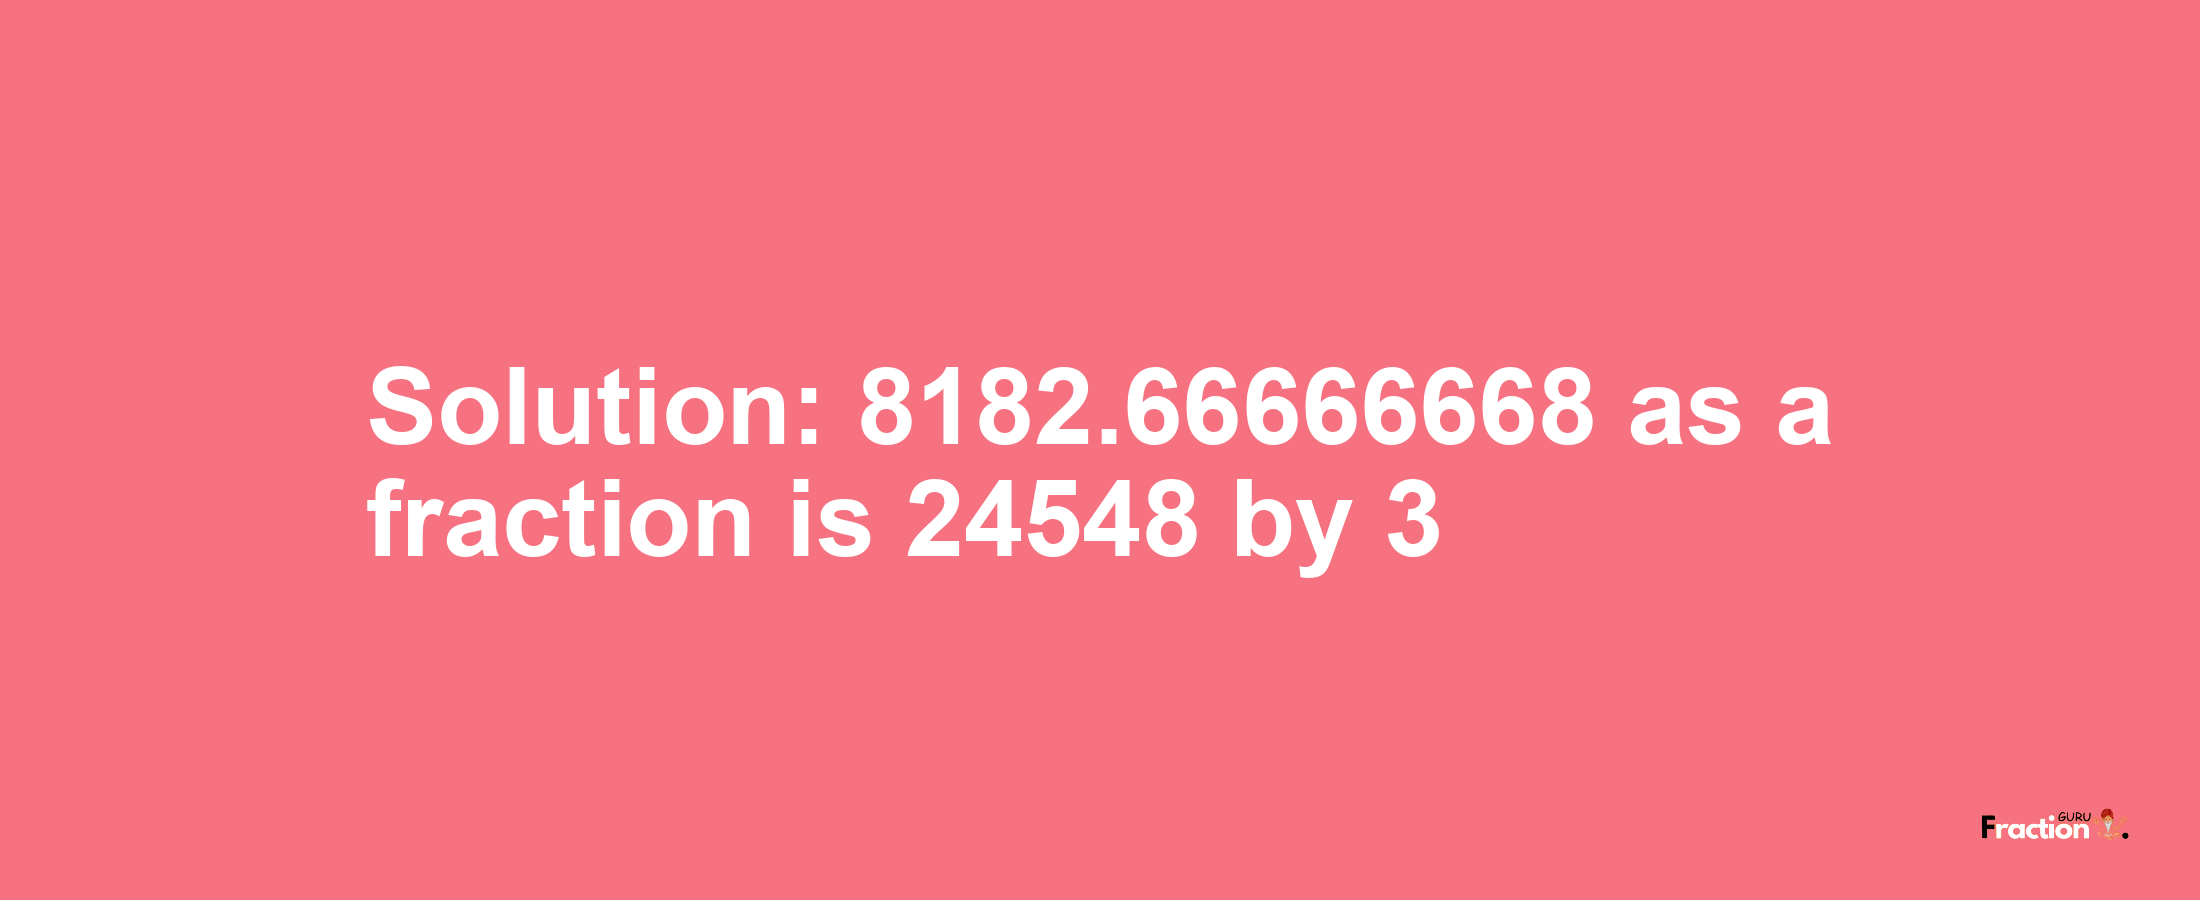 Solution:8182.66666668 as a fraction is 24548/3